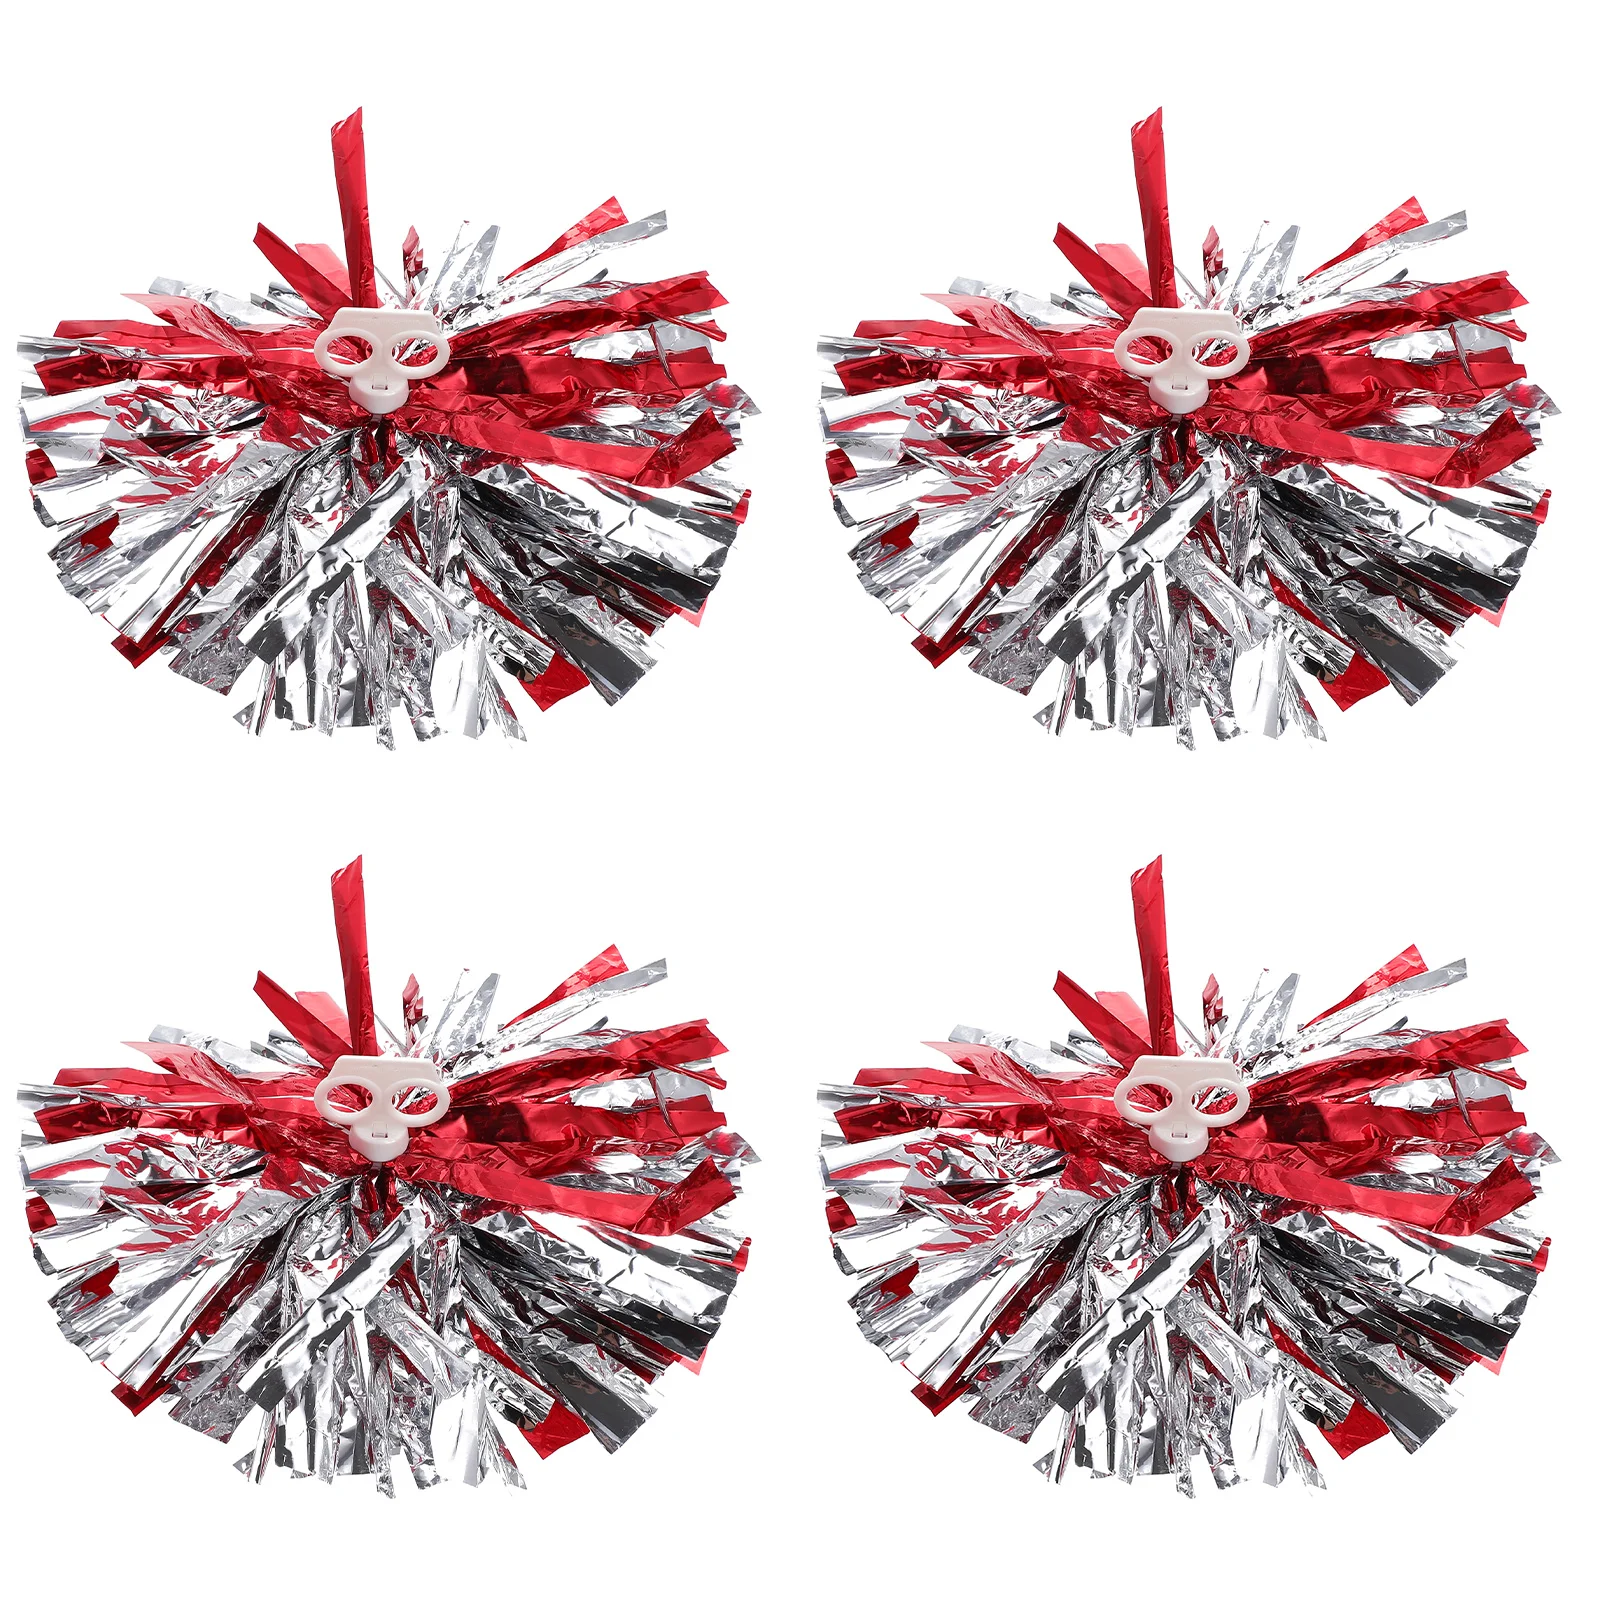 

4 Pcs Mini Pom Poms Cheerleading Bouquet Sports Event The Ball Cheerleaders Portable Cheering Pompoms Game